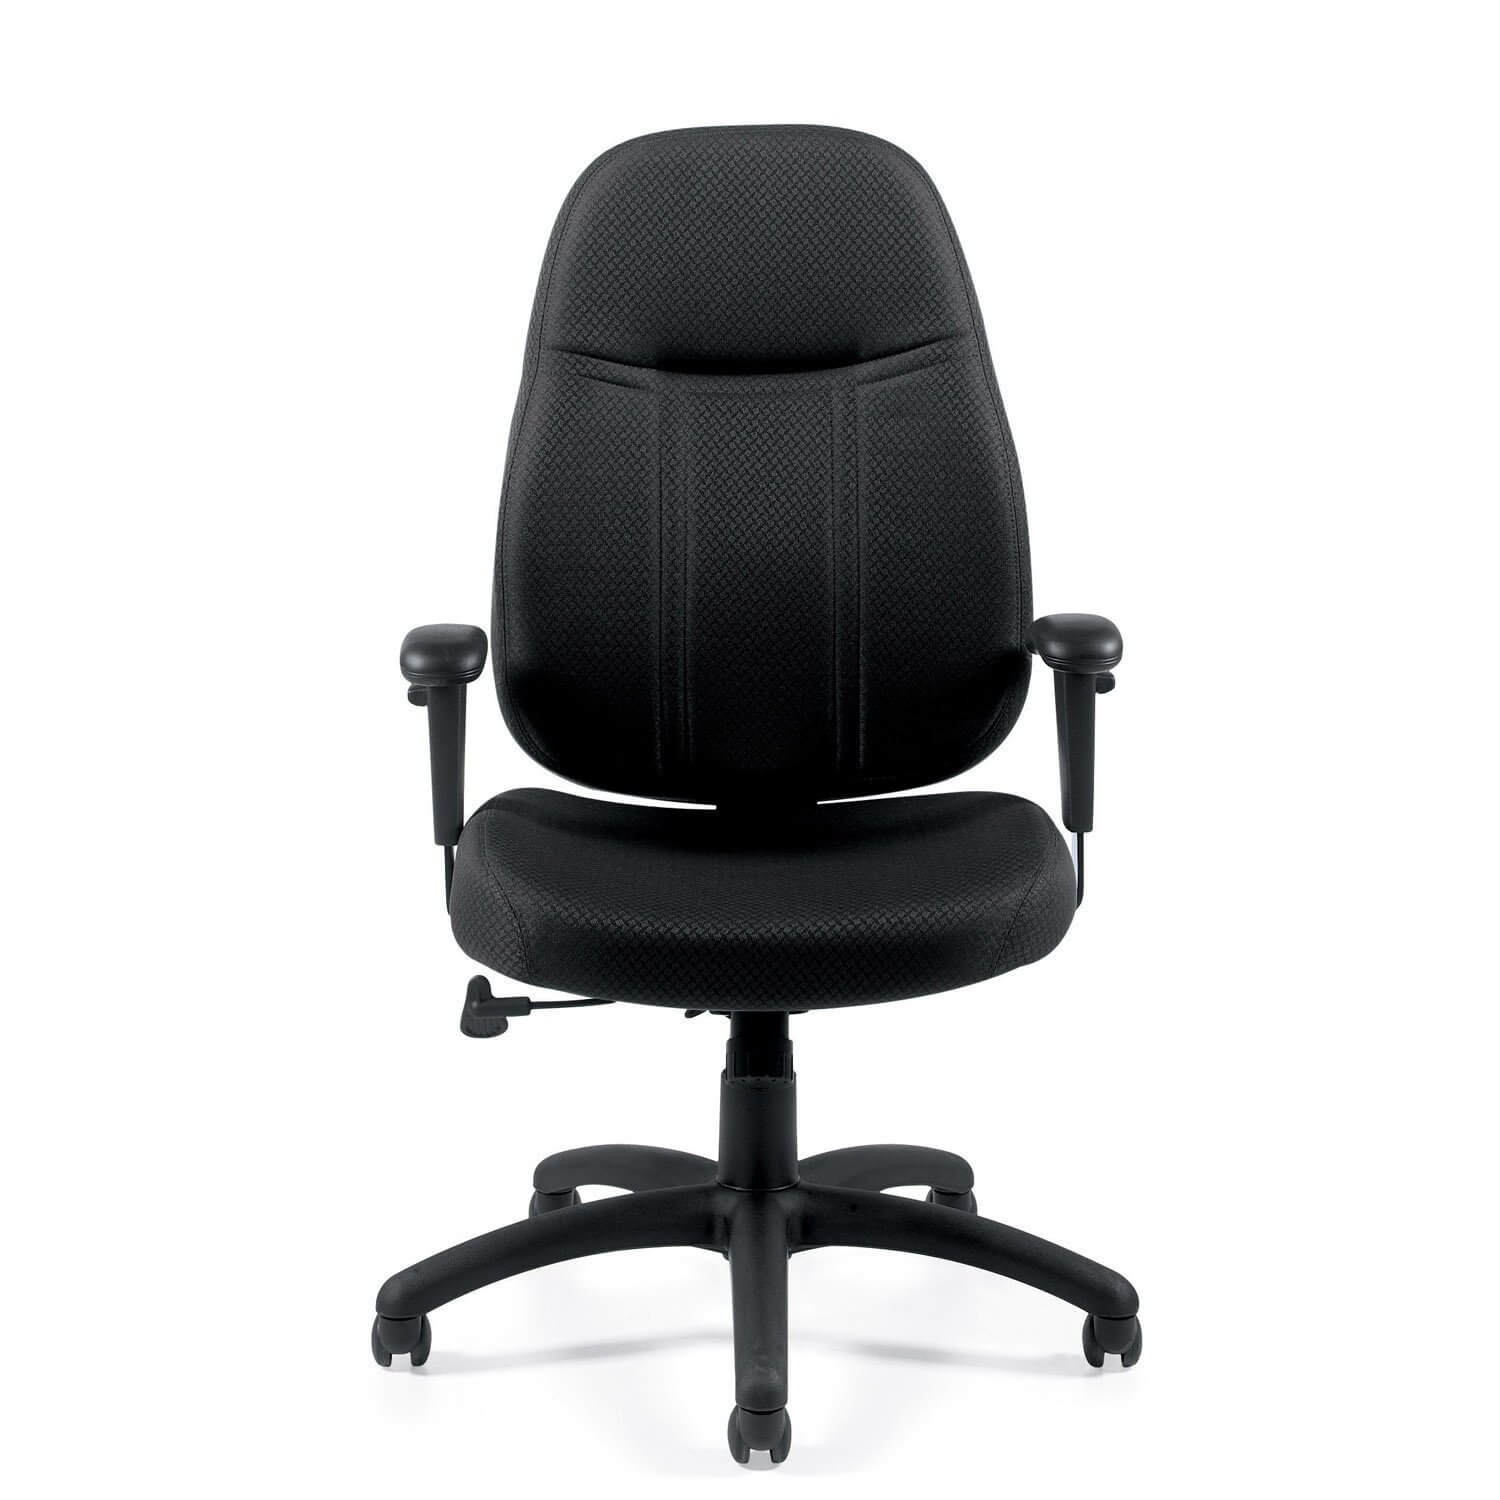 Adjustable office chair front view